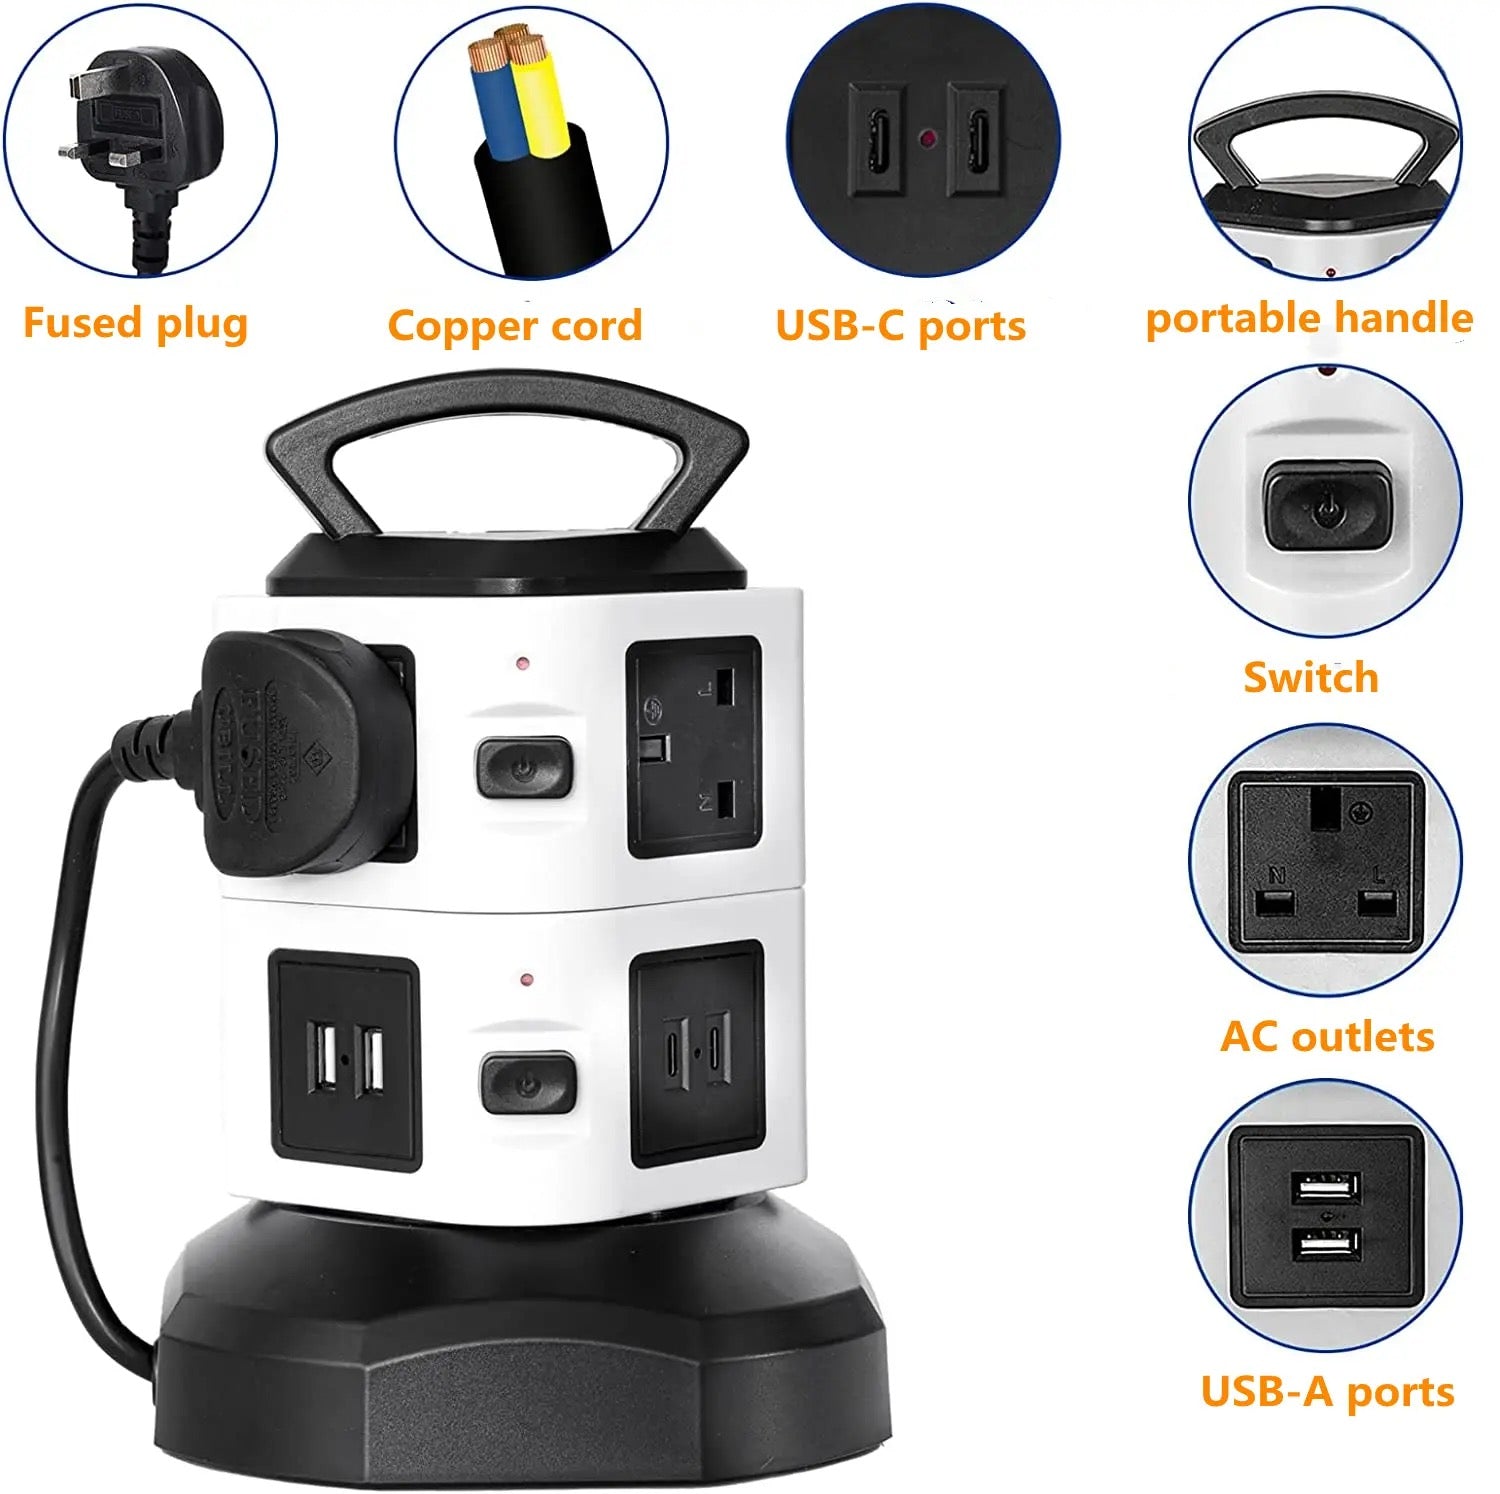 Vertical Socket Power Strip Surge Protector Extension with USB Ports